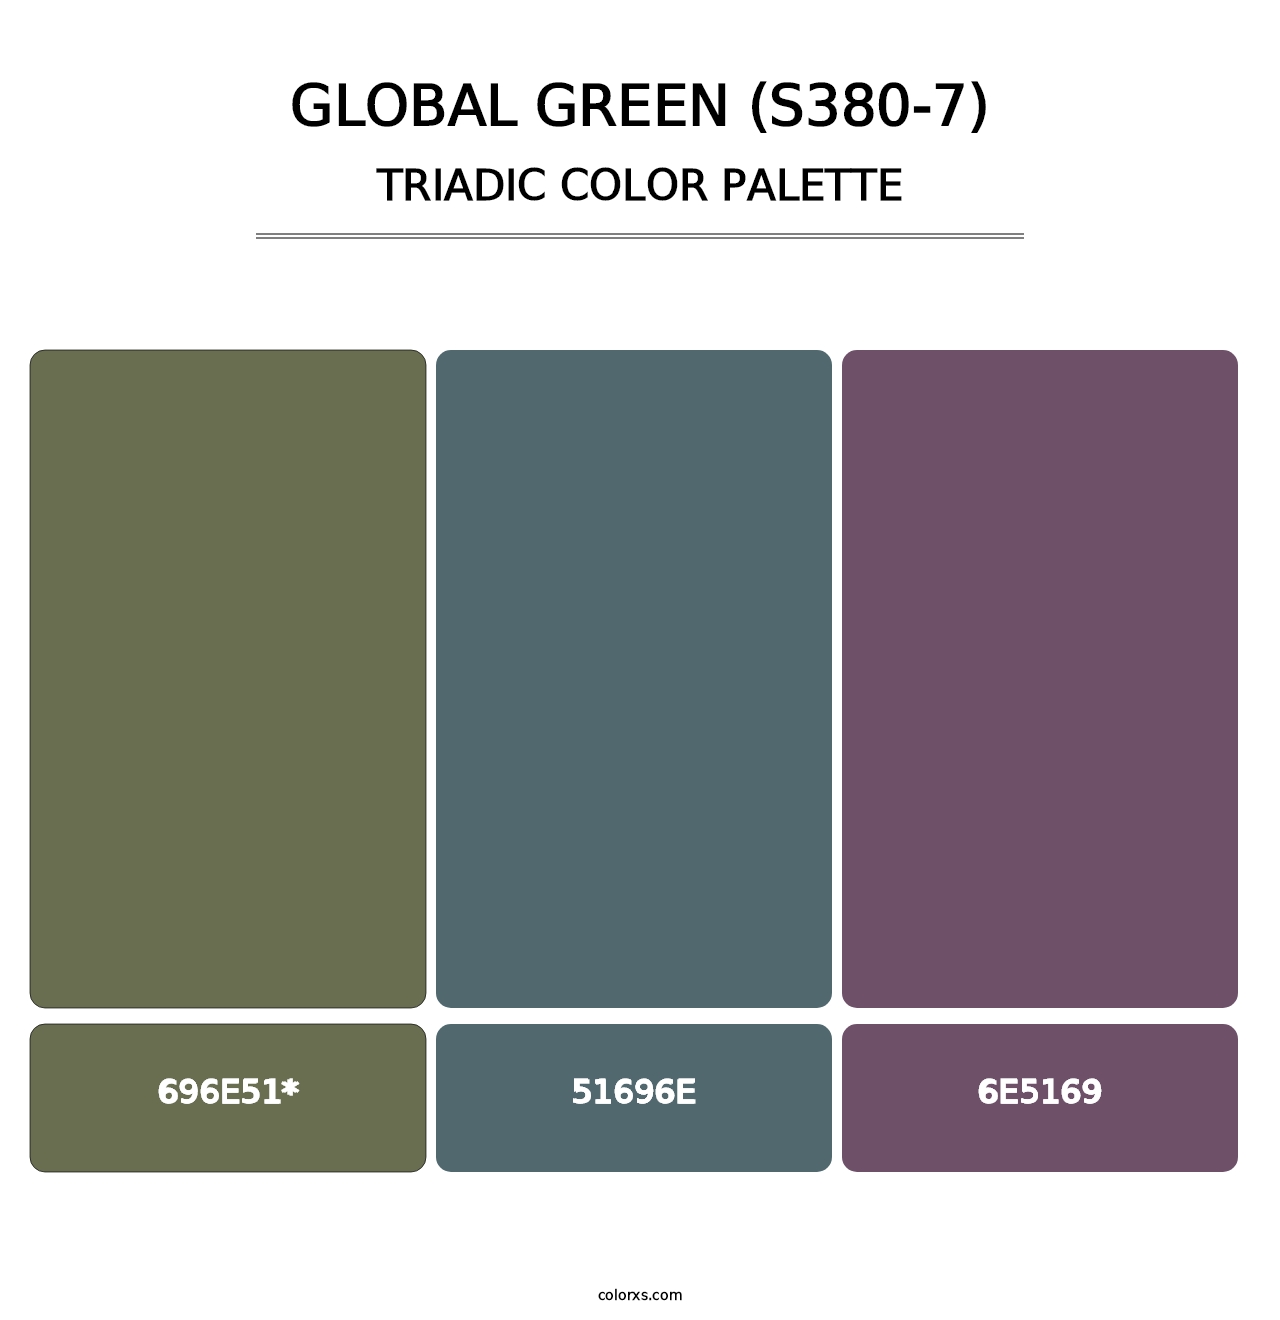 Global Green (S380-7) - Triadic Color Palette